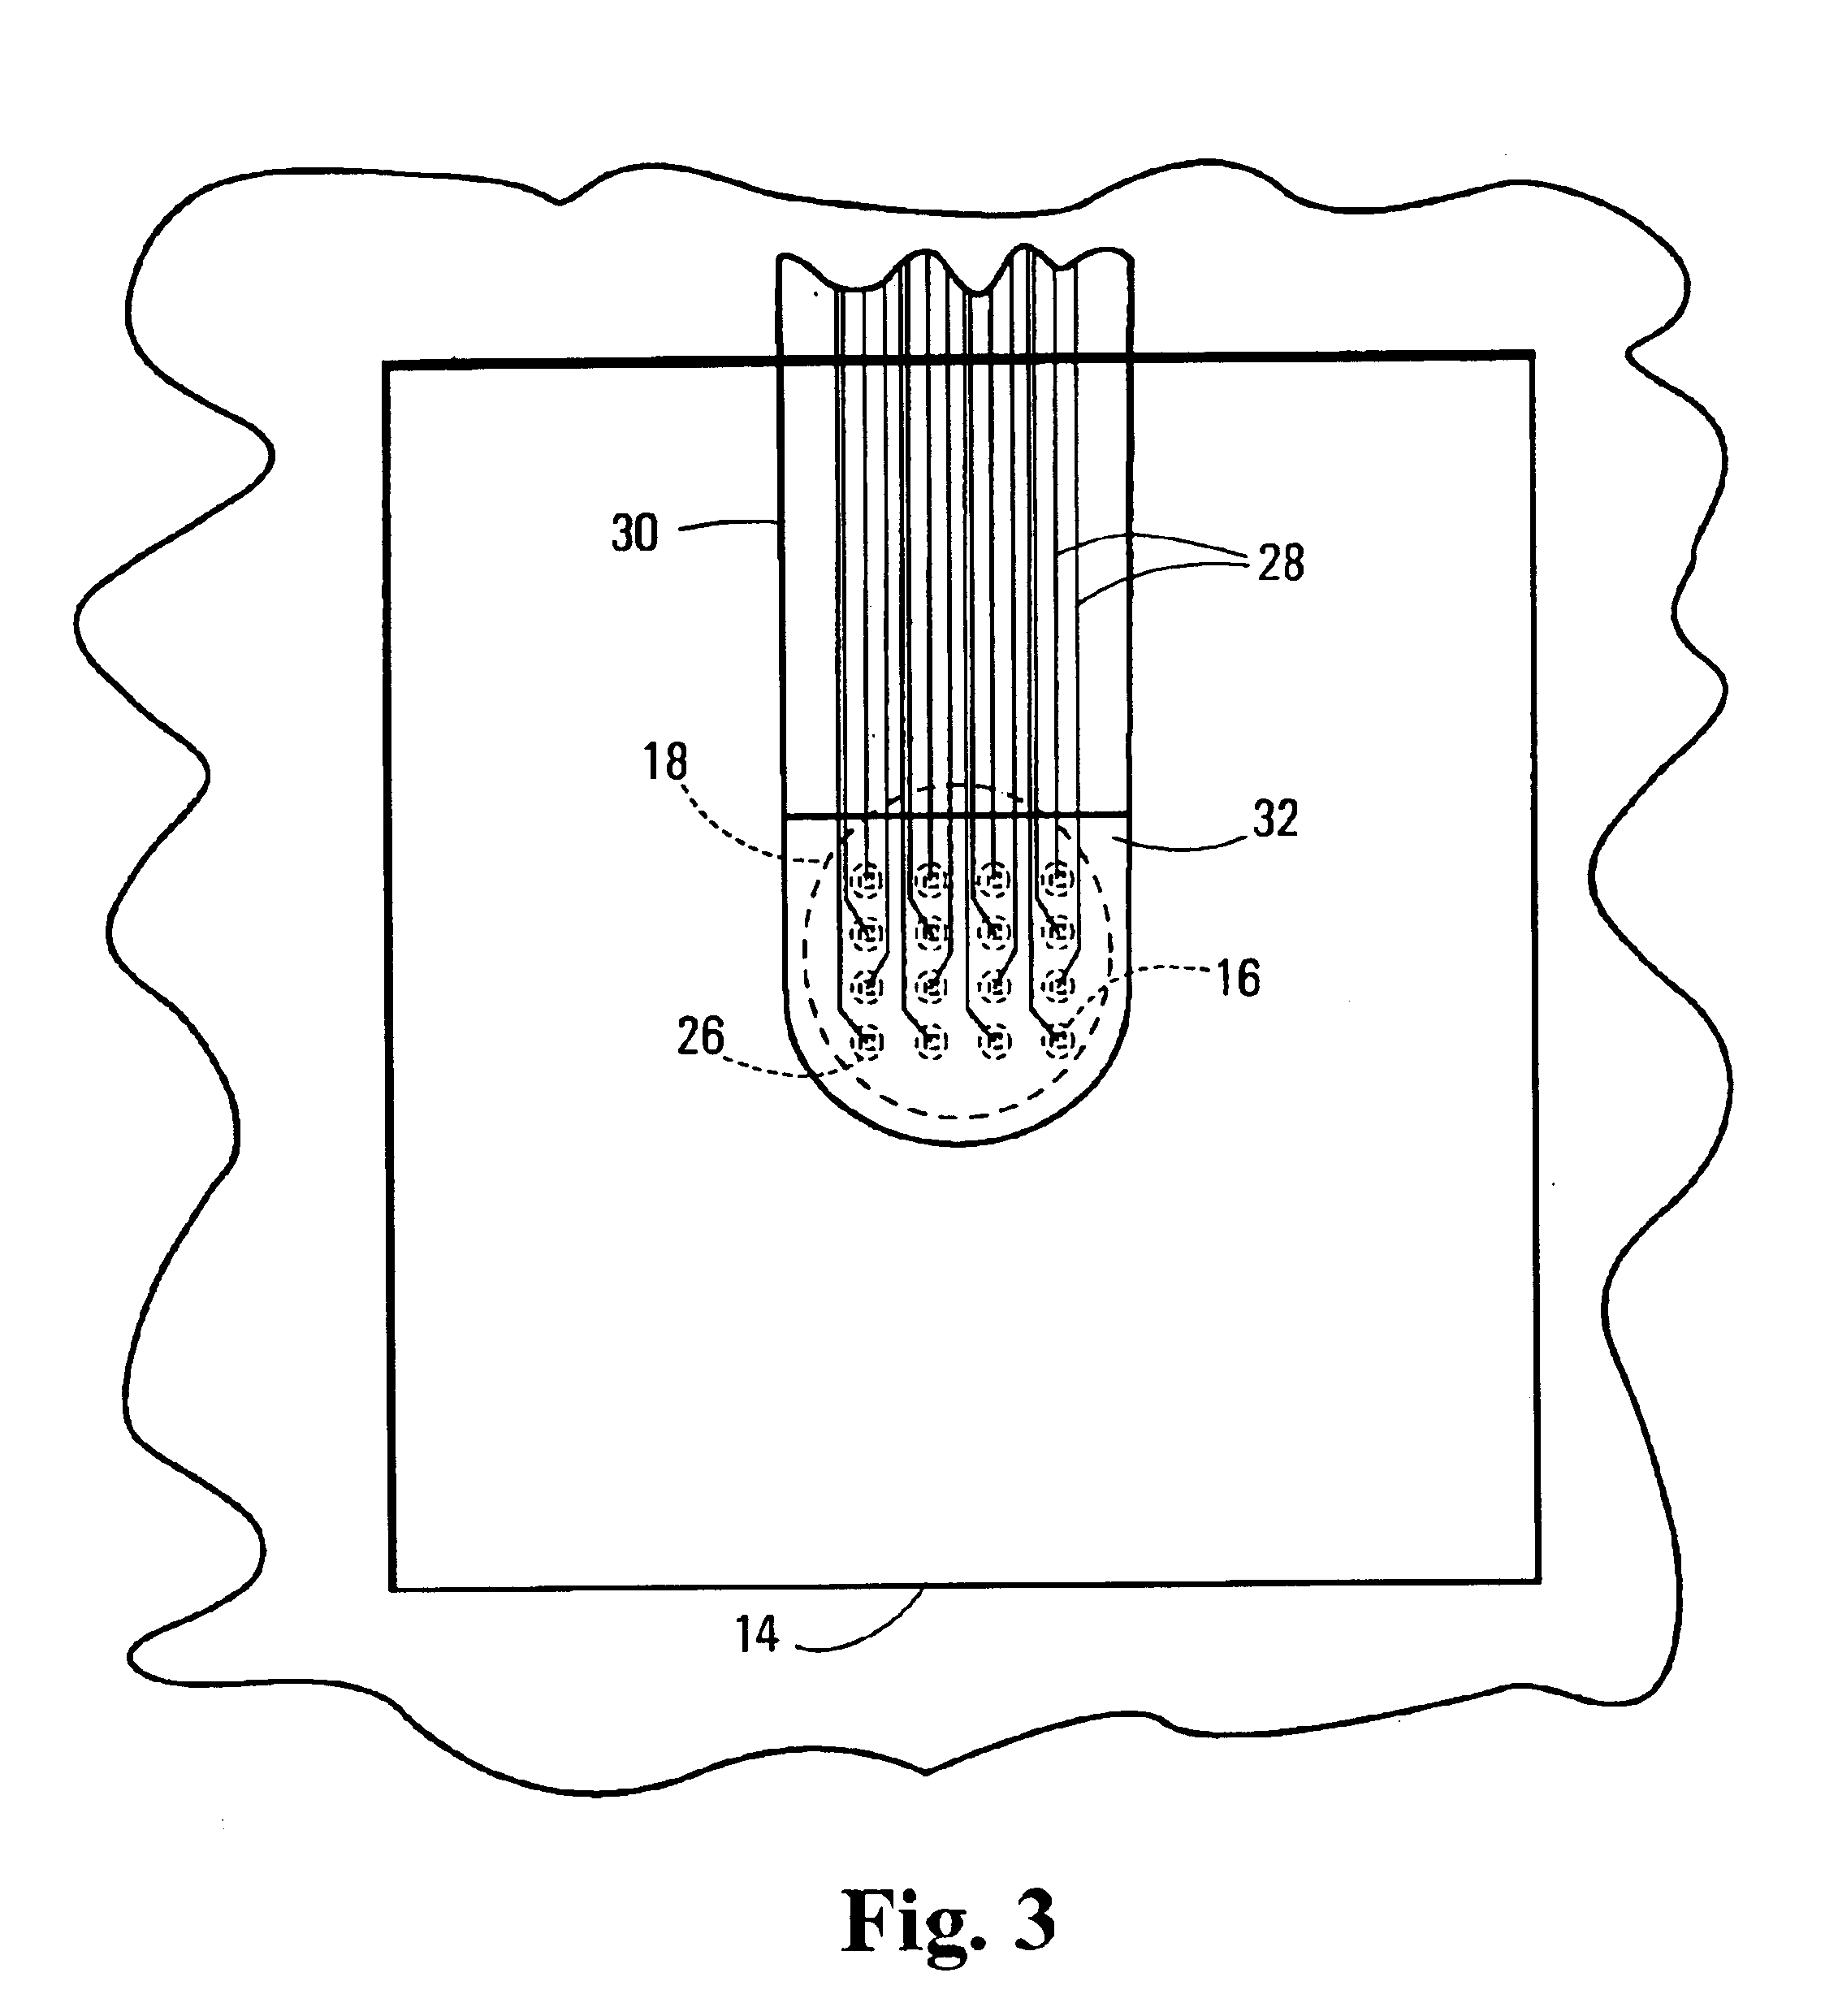 Flexible connecting device for interfacing with a wafer